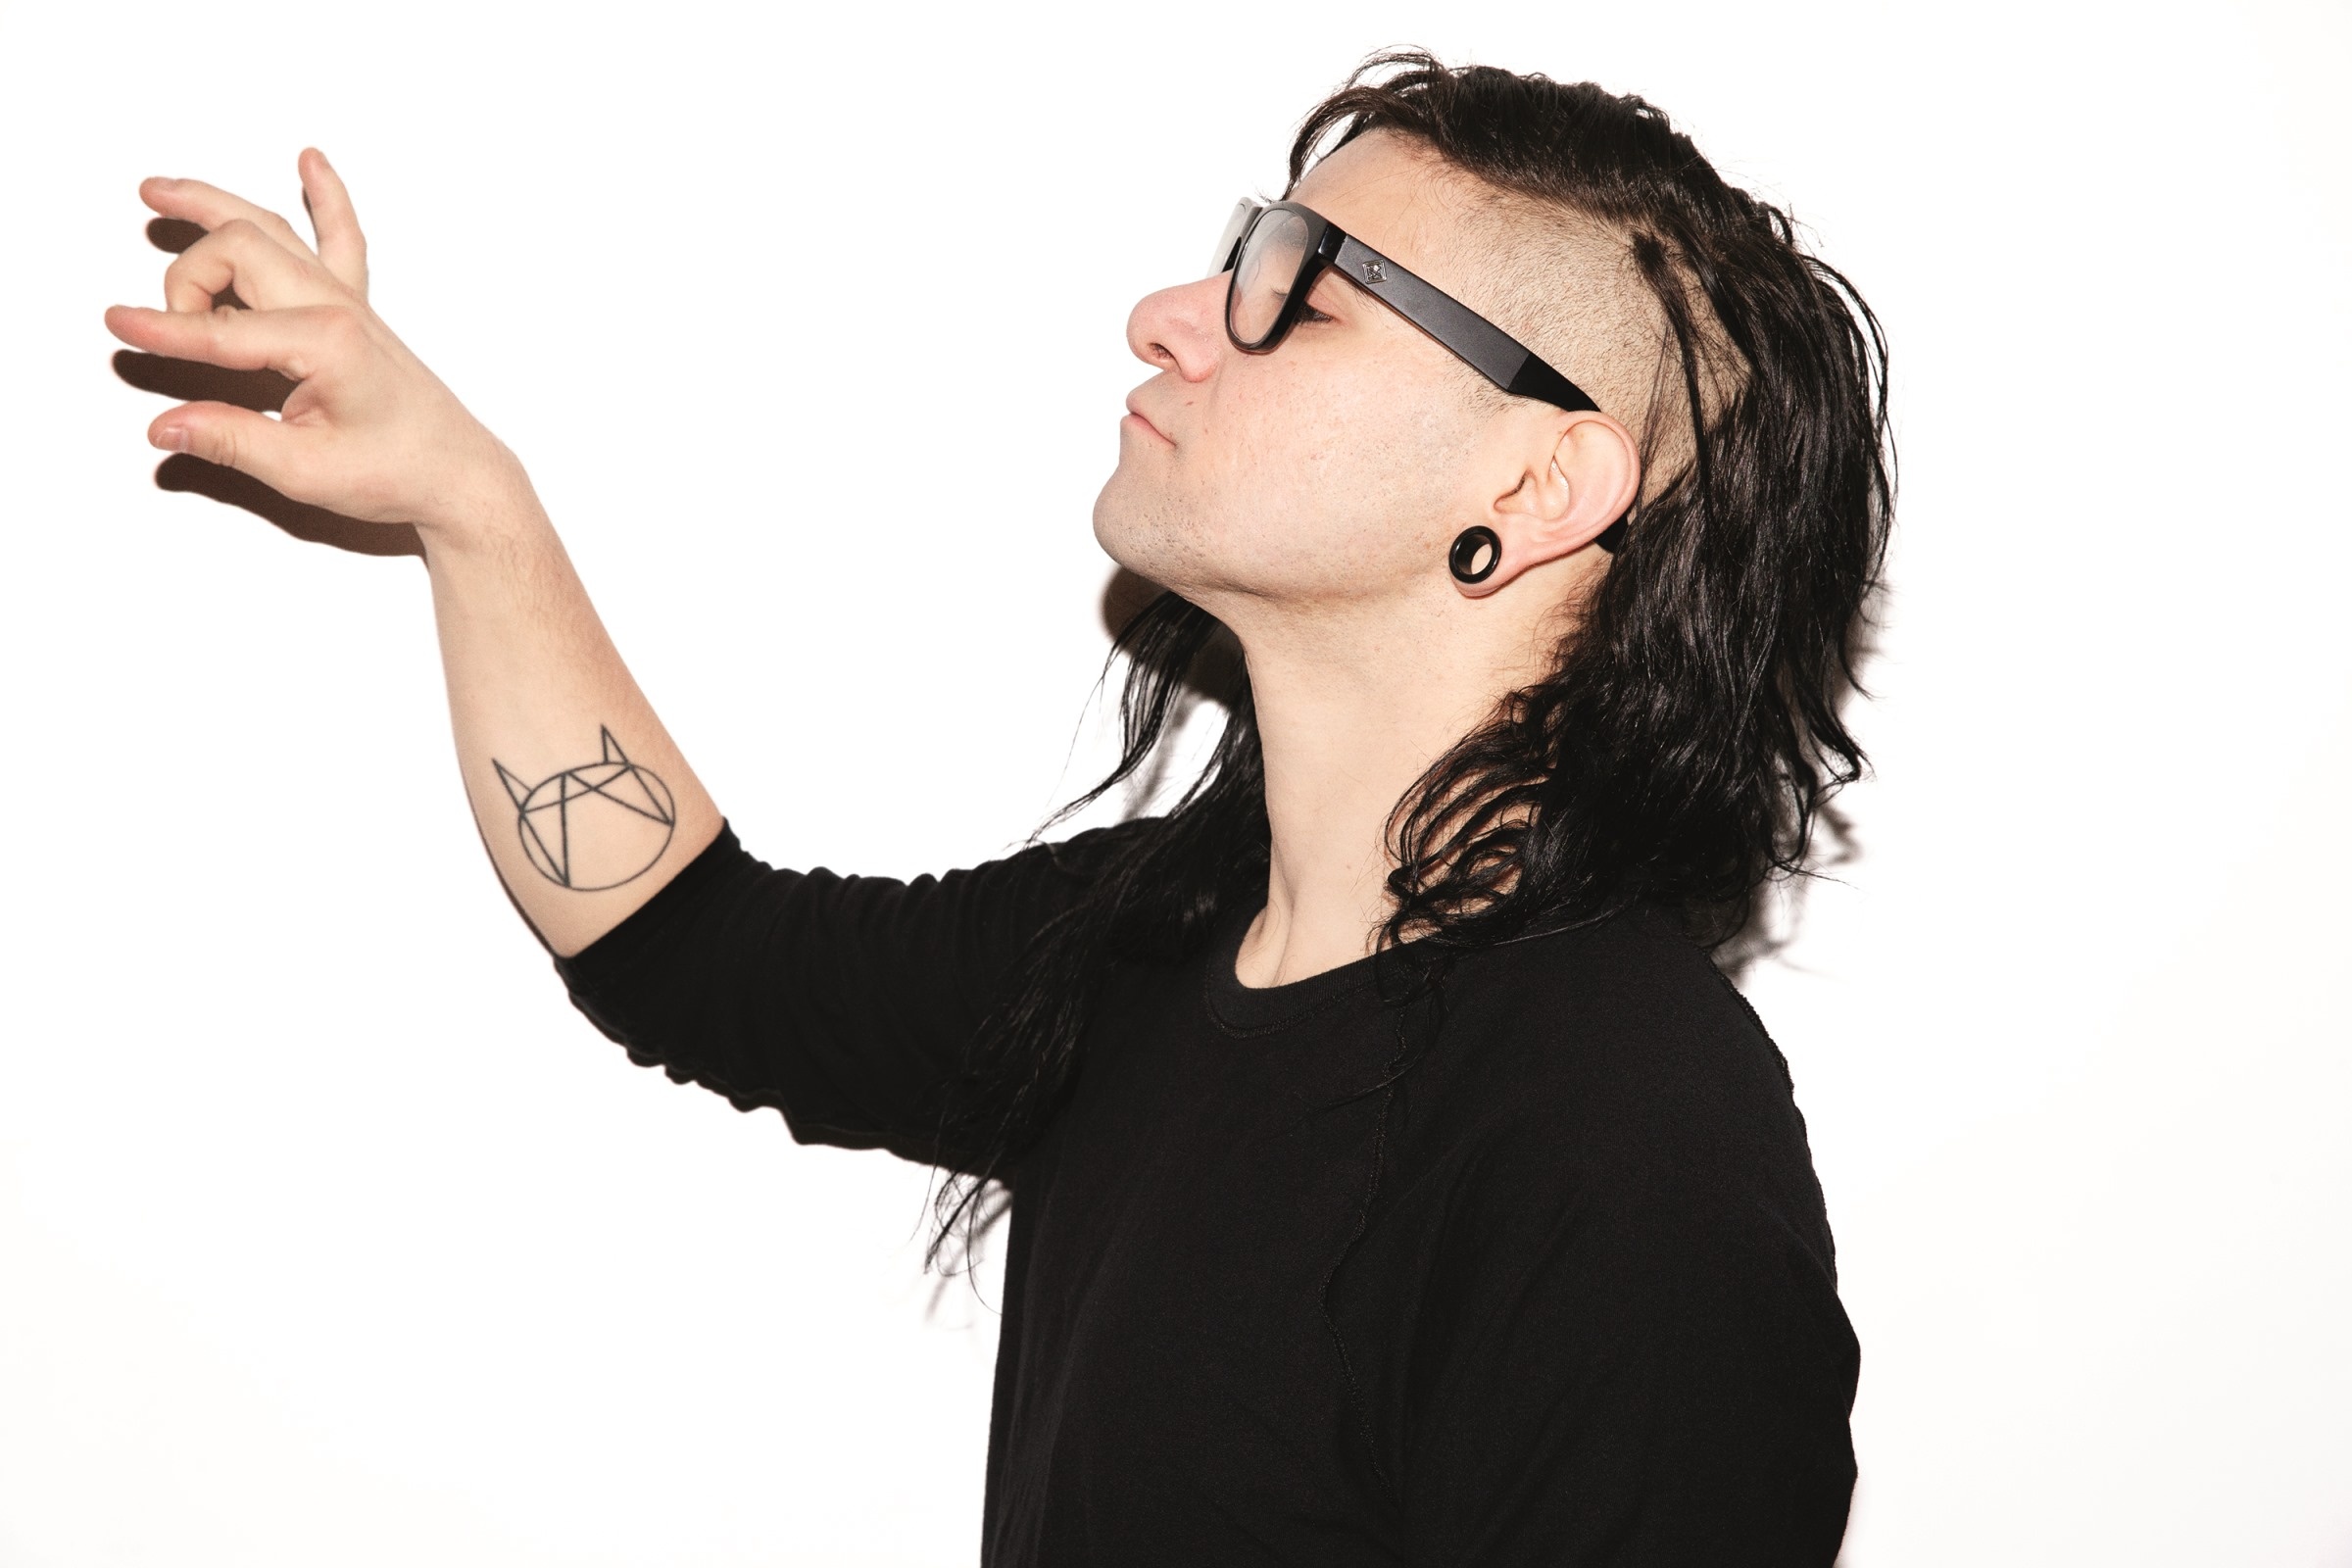 Skrillex says 'Sorry' vocal hook was created not sampled 2400x1600